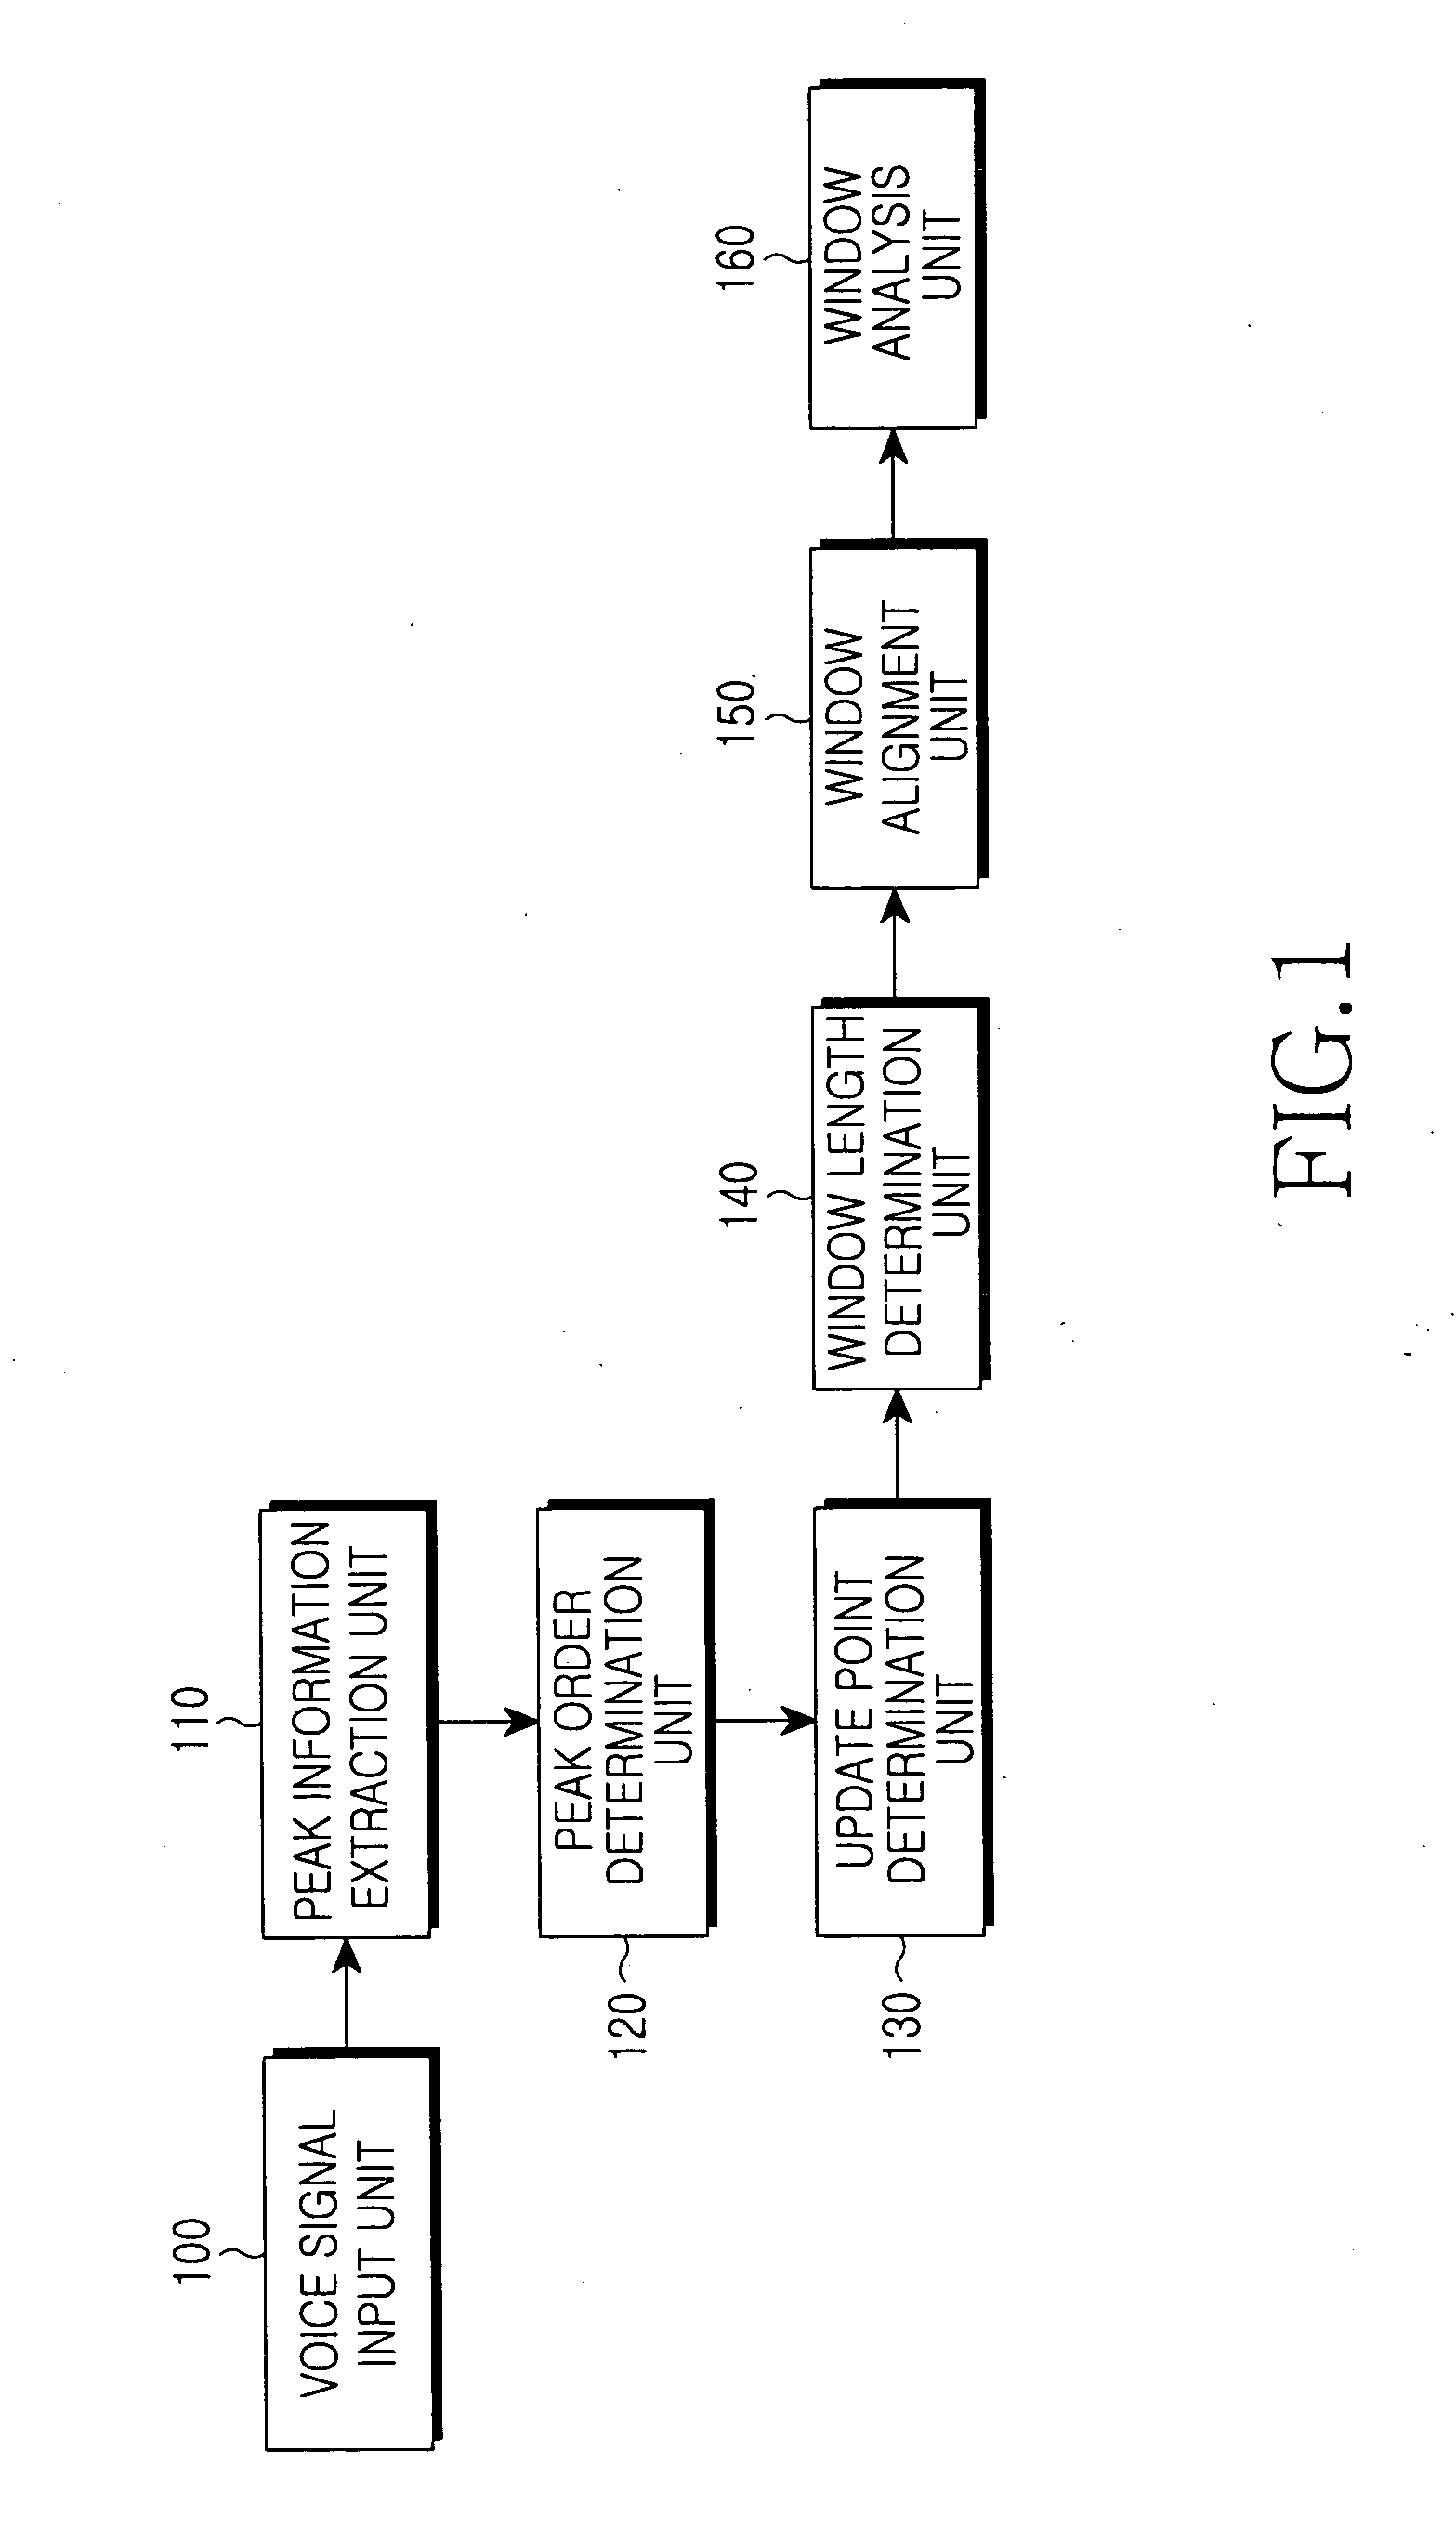 Method and system for aligning windows to extract peak feature from a voice signal